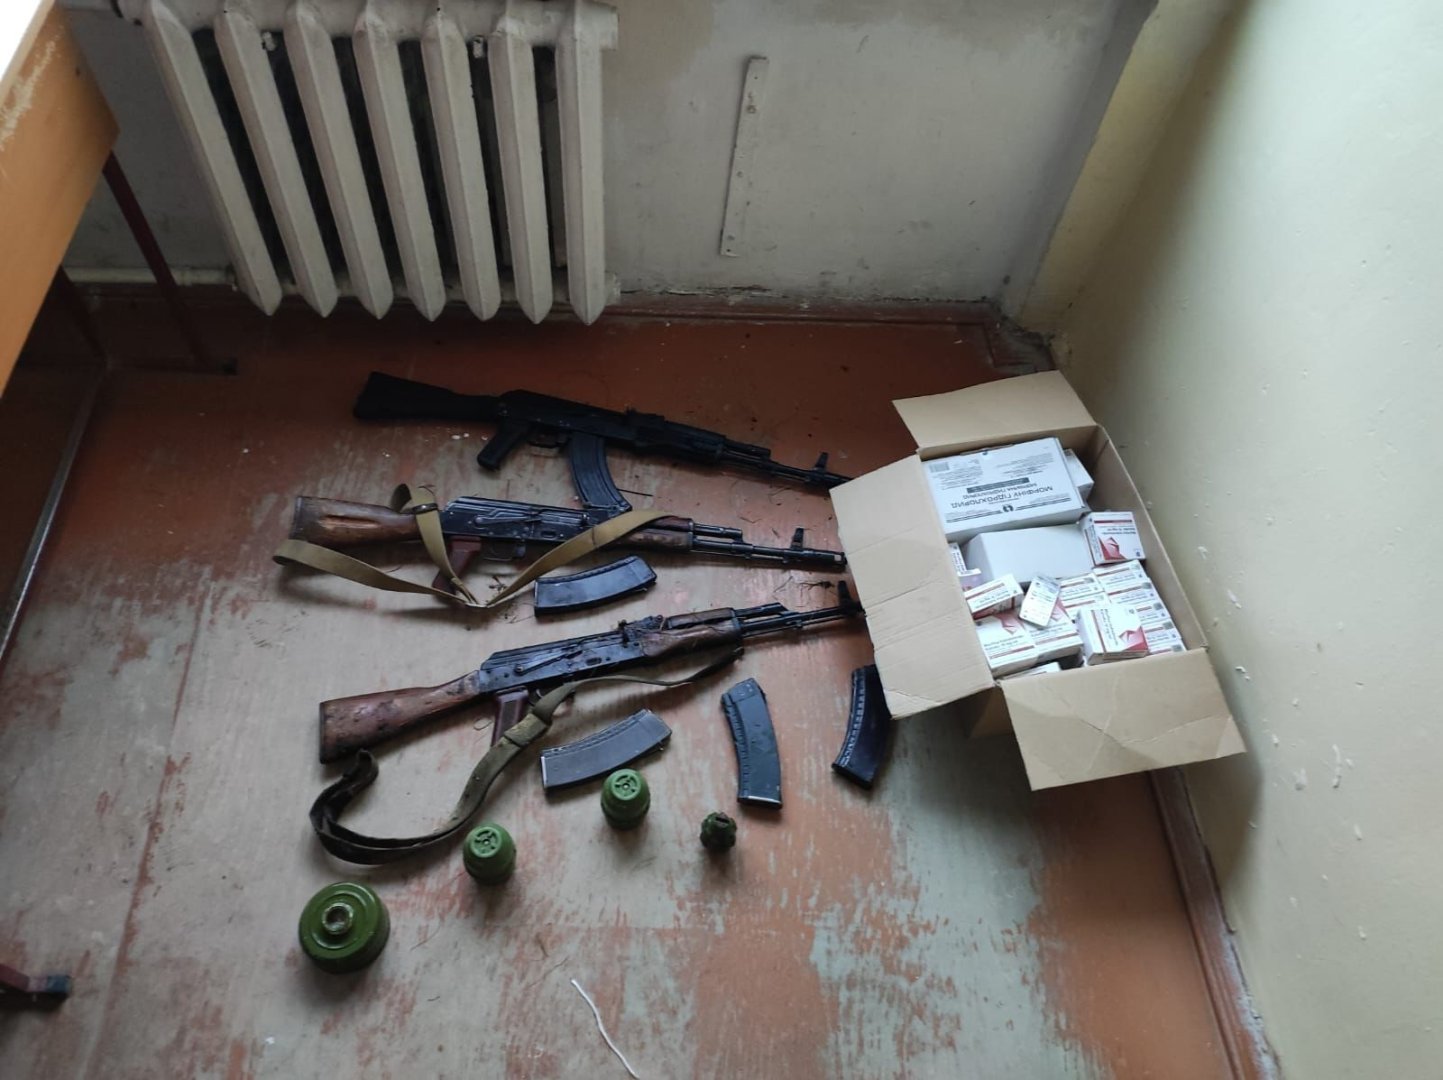 Weapons, ammunition, and communication devices found in Azerbaijan's Khankendi